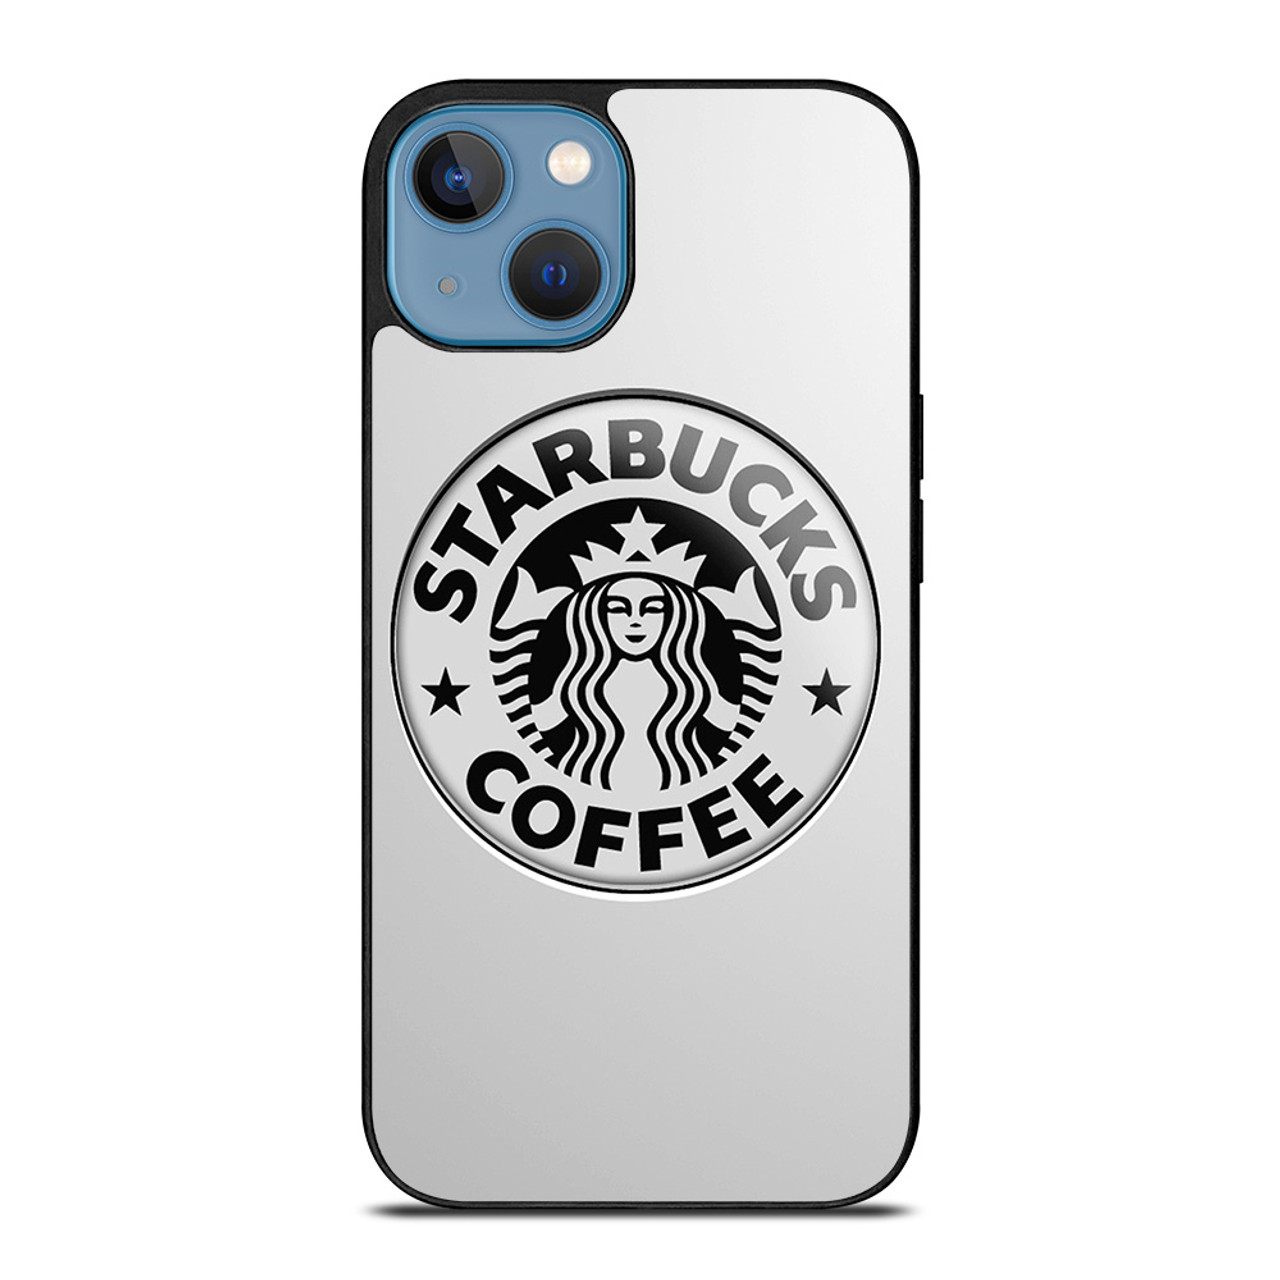 IPhone 14 Case Starbuck Print Design, Mobile Phone Case for IPhone